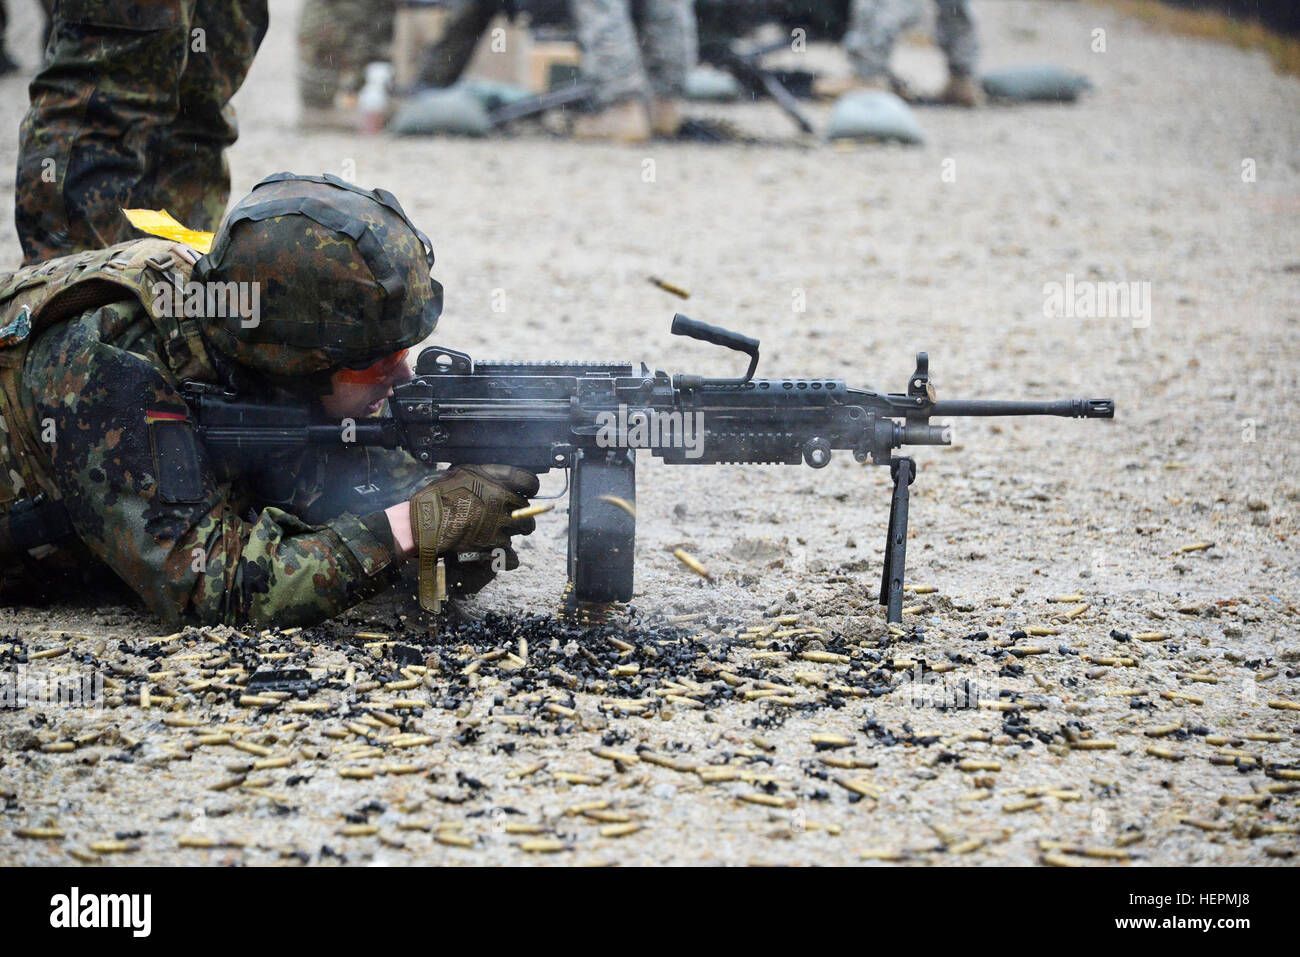 A German soldier fires a M249 light machine gun during a familiarization training on U.S. weapons at the 7th Army Joint Multinational Training Command Grafenwoehr Training Area, Germany, Dec. 9, 2015. (U.S. Army photo by Visual Information Specialist Gertrud Zach/released) CATC trains German soldiers on US weapons 151209-A-HE539-0858 Stock Photo